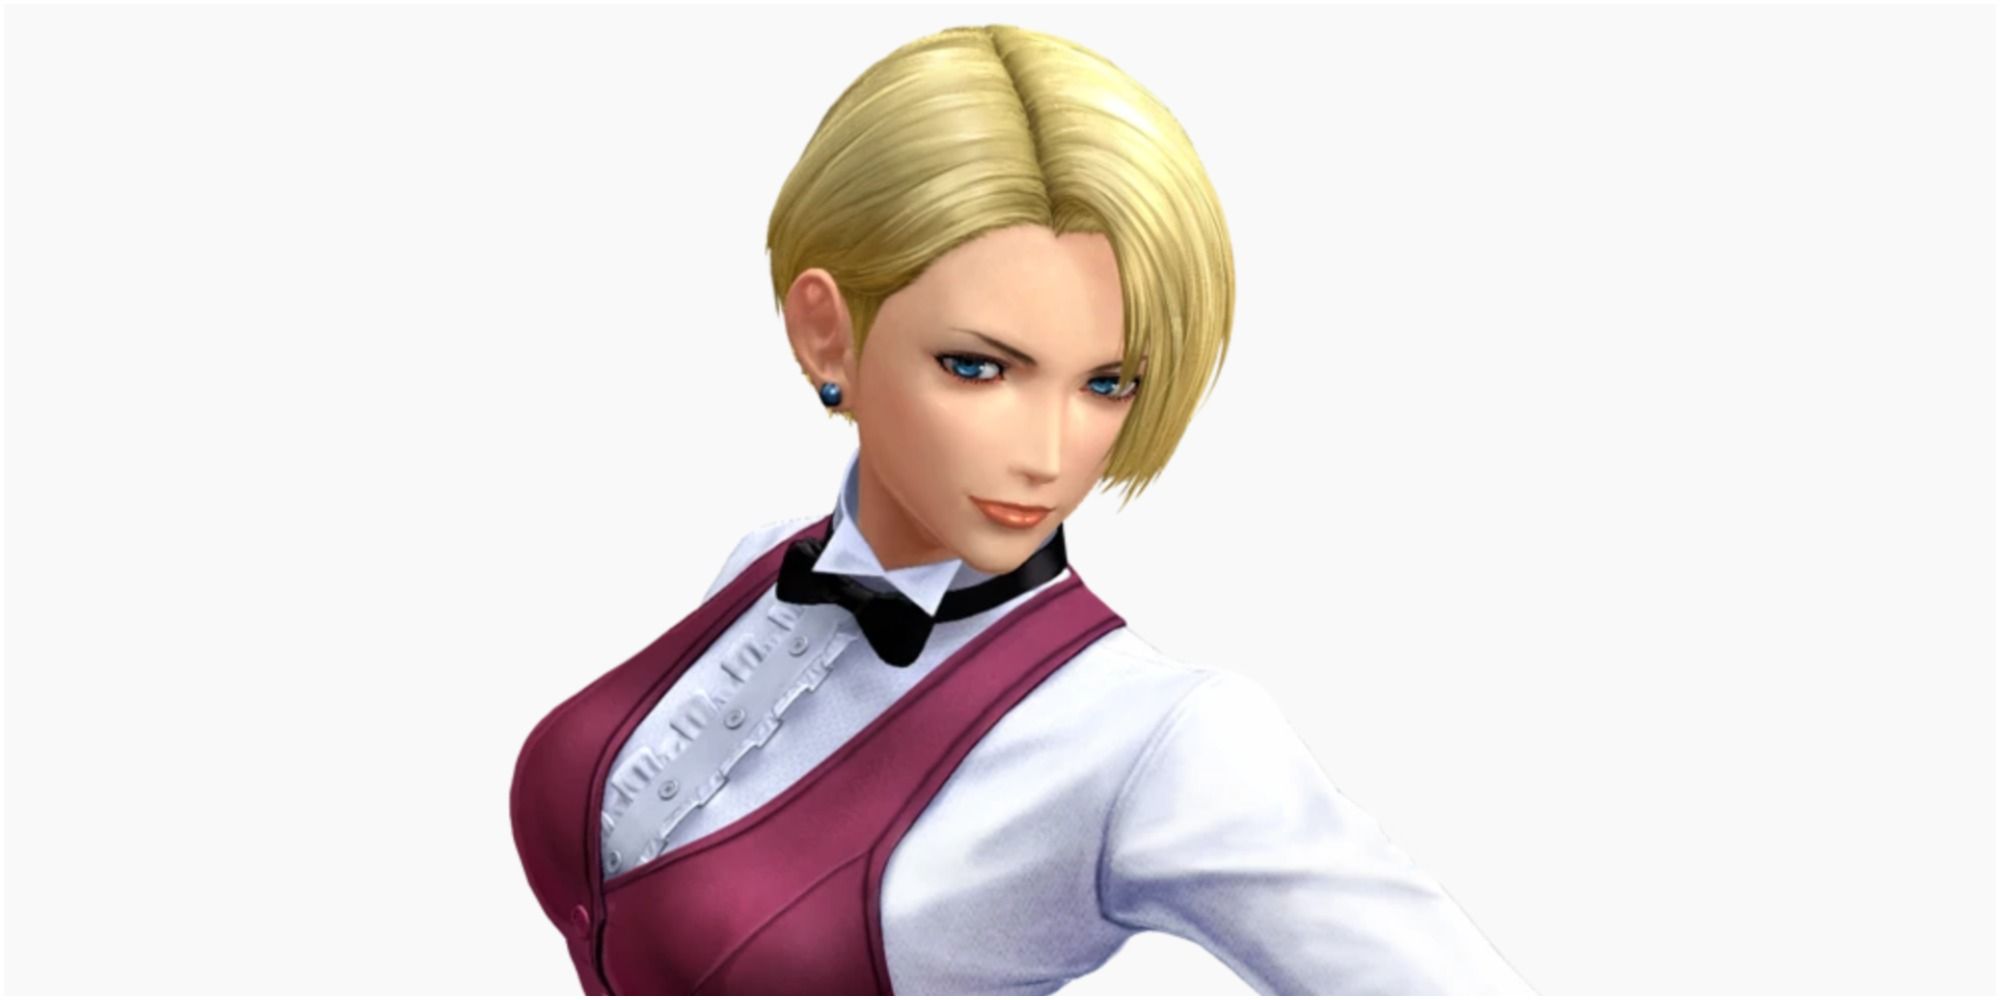 King from the King Of Fighters series